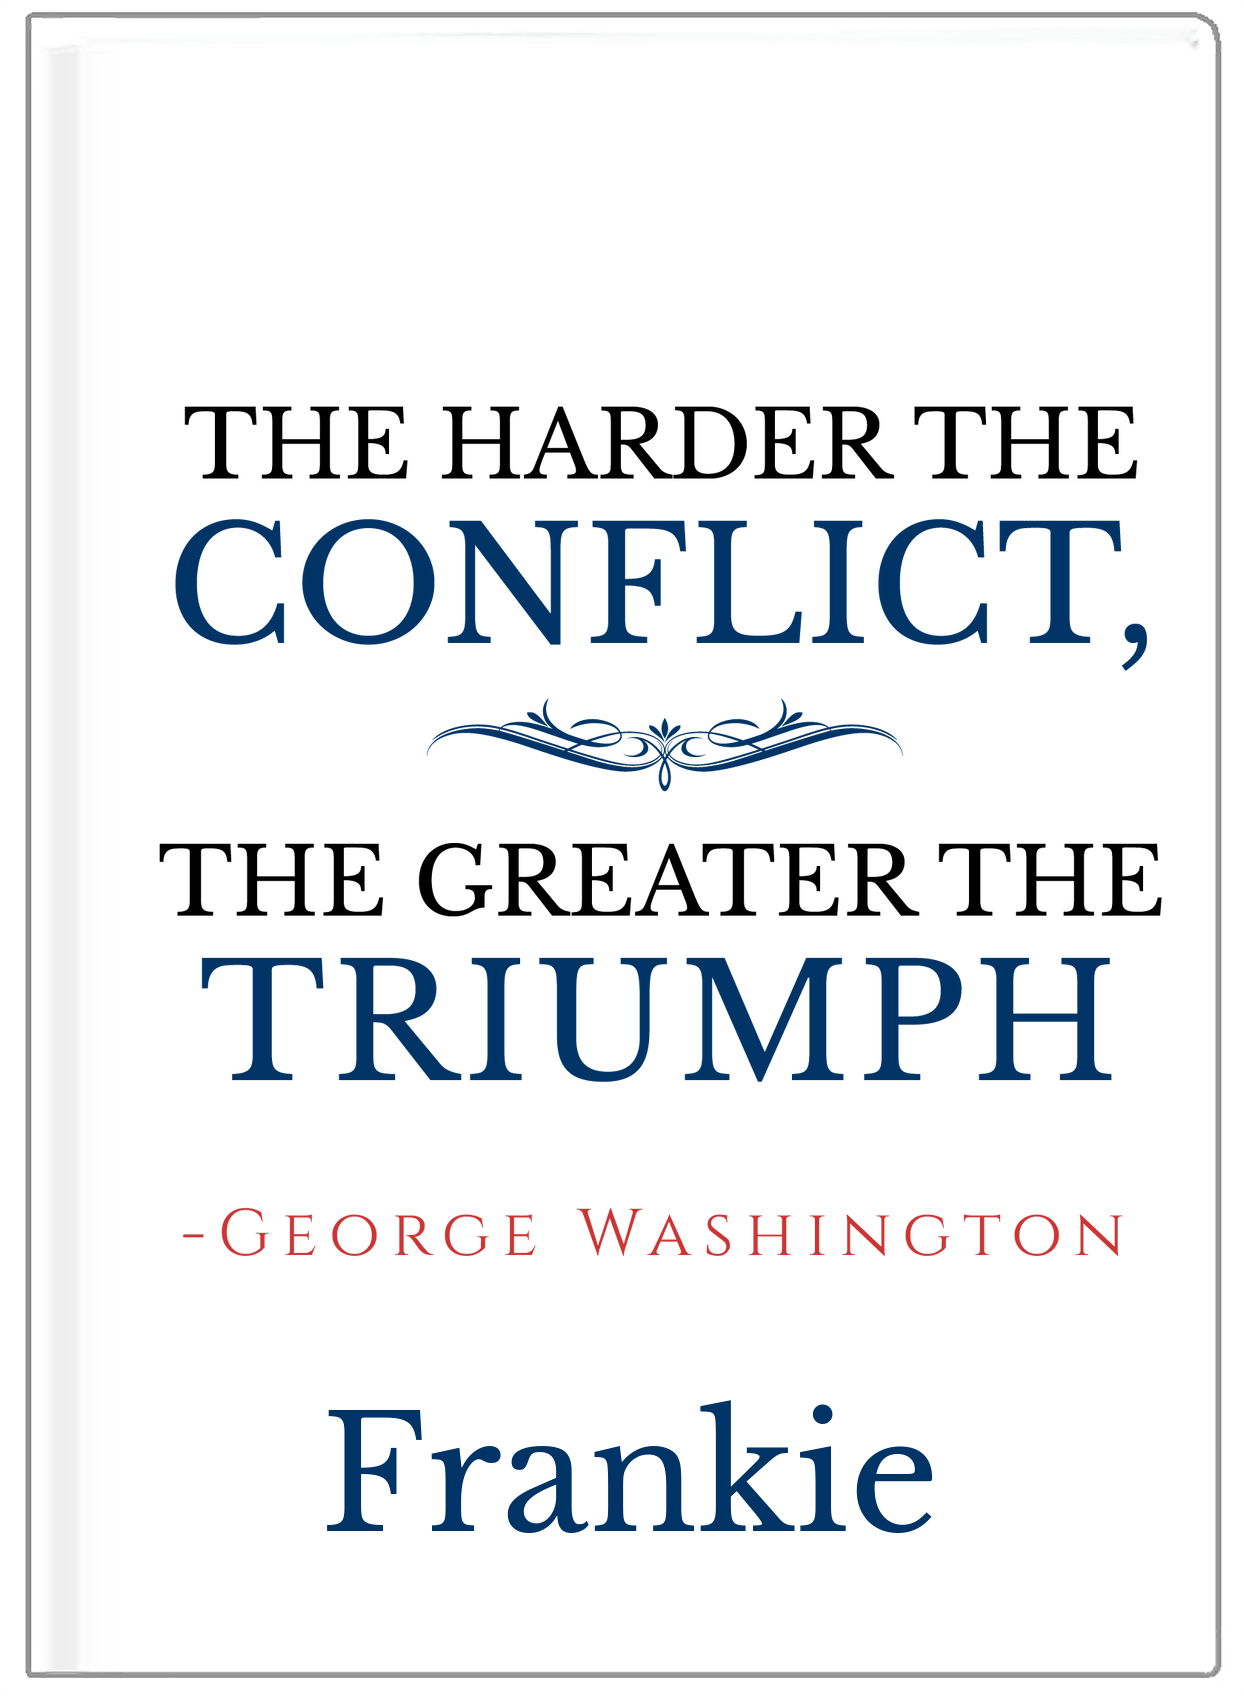 Personalized Famous Quotes Journal - George Washington - Front View